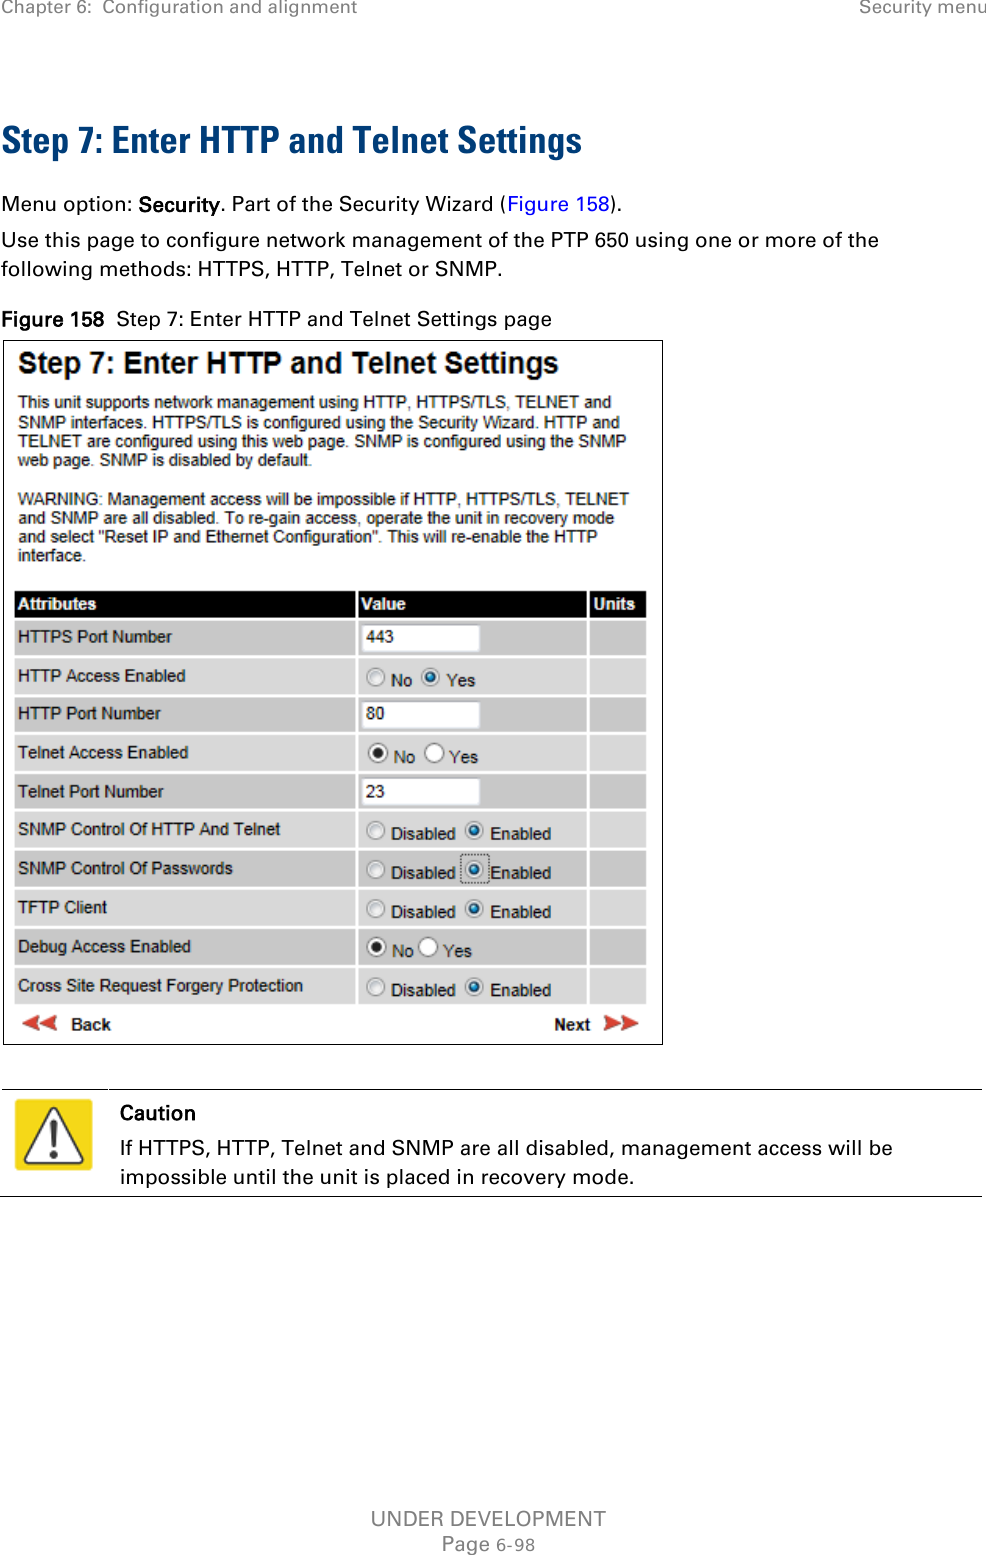 Chapter 6:  Configuration and alignment  Security menu  Step 7: Enter HTTP and Telnet Settings Menu option: Security. Part of the Security Wizard (Figure 158). Use this page to configure network management of the PTP 650 using one or more of the following methods: HTTPS, HTTP, Telnet or SNMP. Figure 158  Step 7: Enter HTTP and Telnet Settings page    Caution If HTTPS, HTTP, Telnet and SNMP are all disabled, management access will be impossible until the unit is placed in recovery mode.  UNDER DEVELOPMENT Page 6-98 